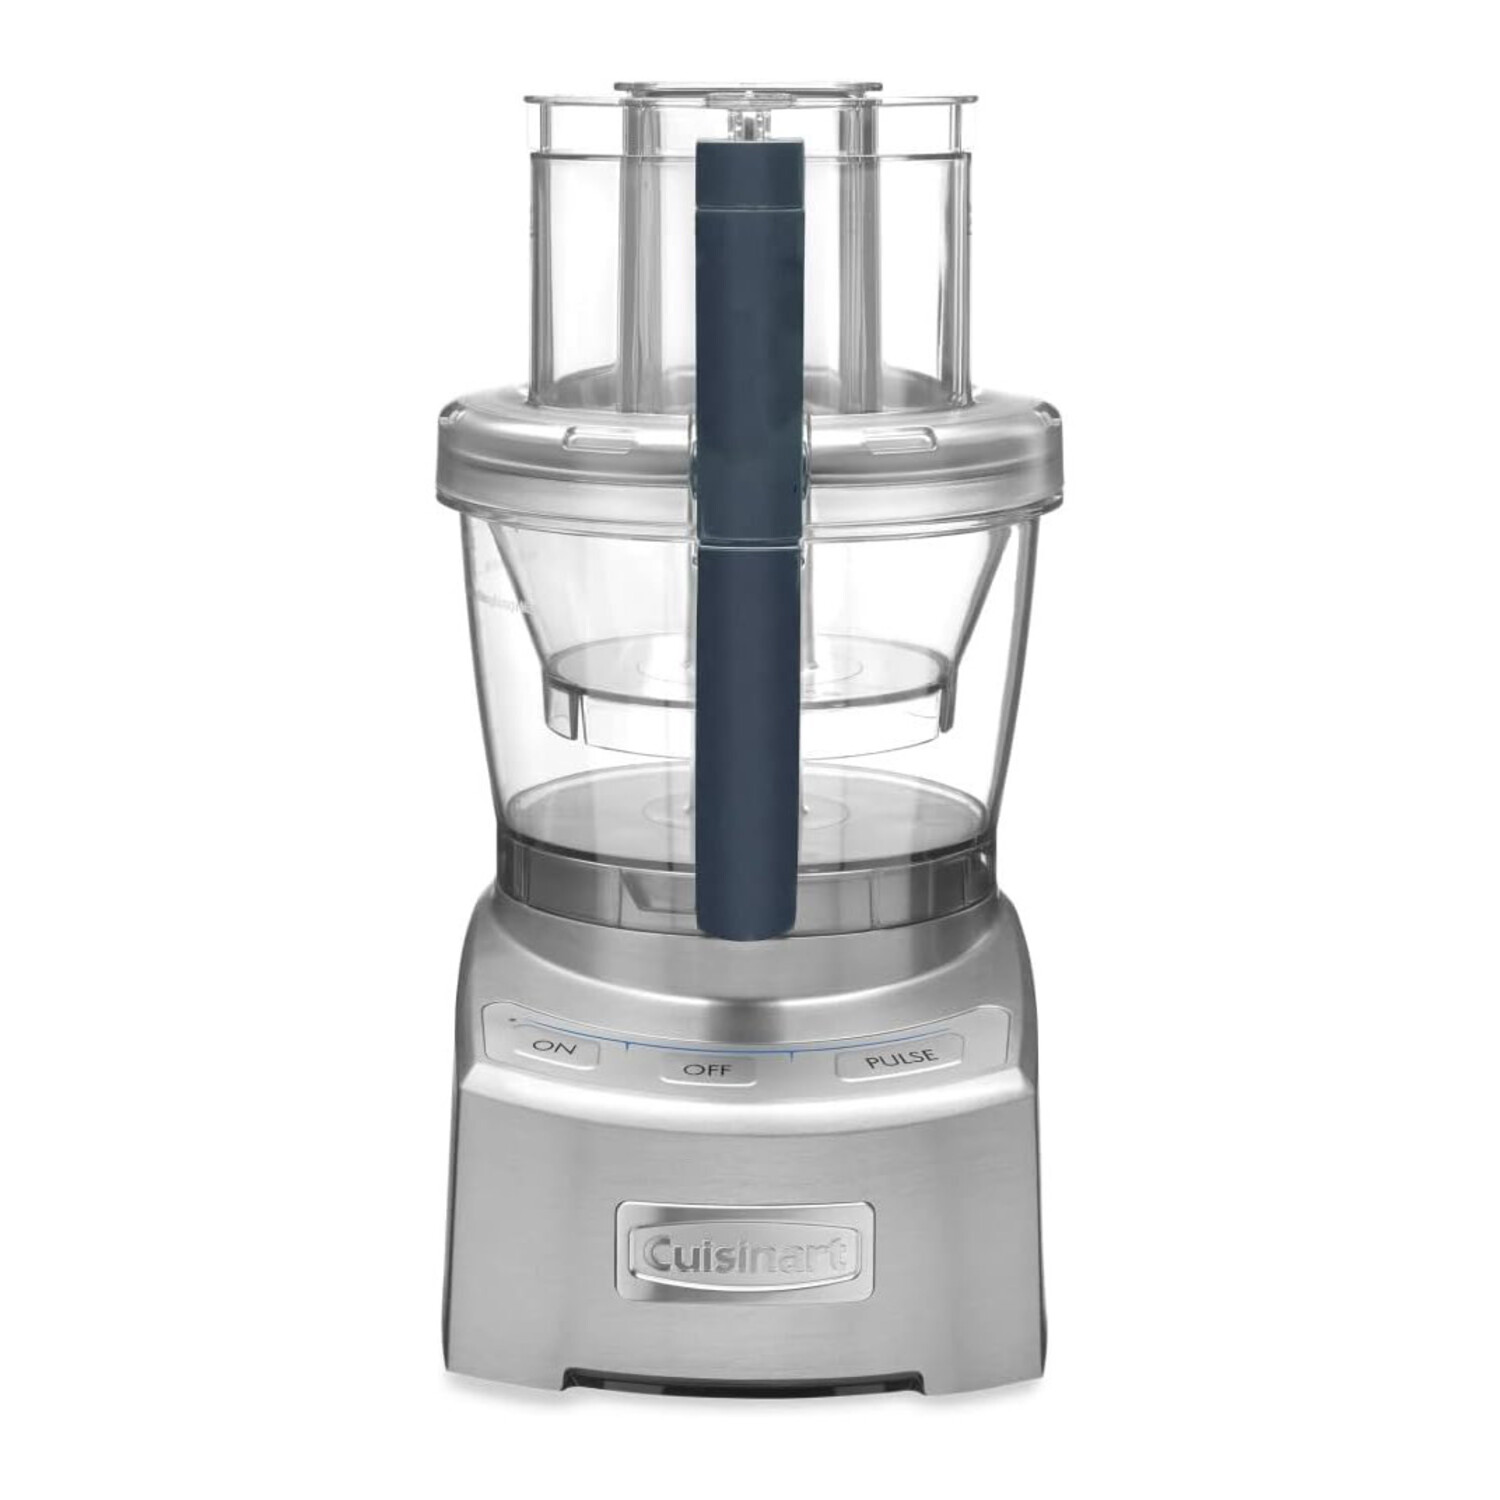 food processor, 12cup - Whisk